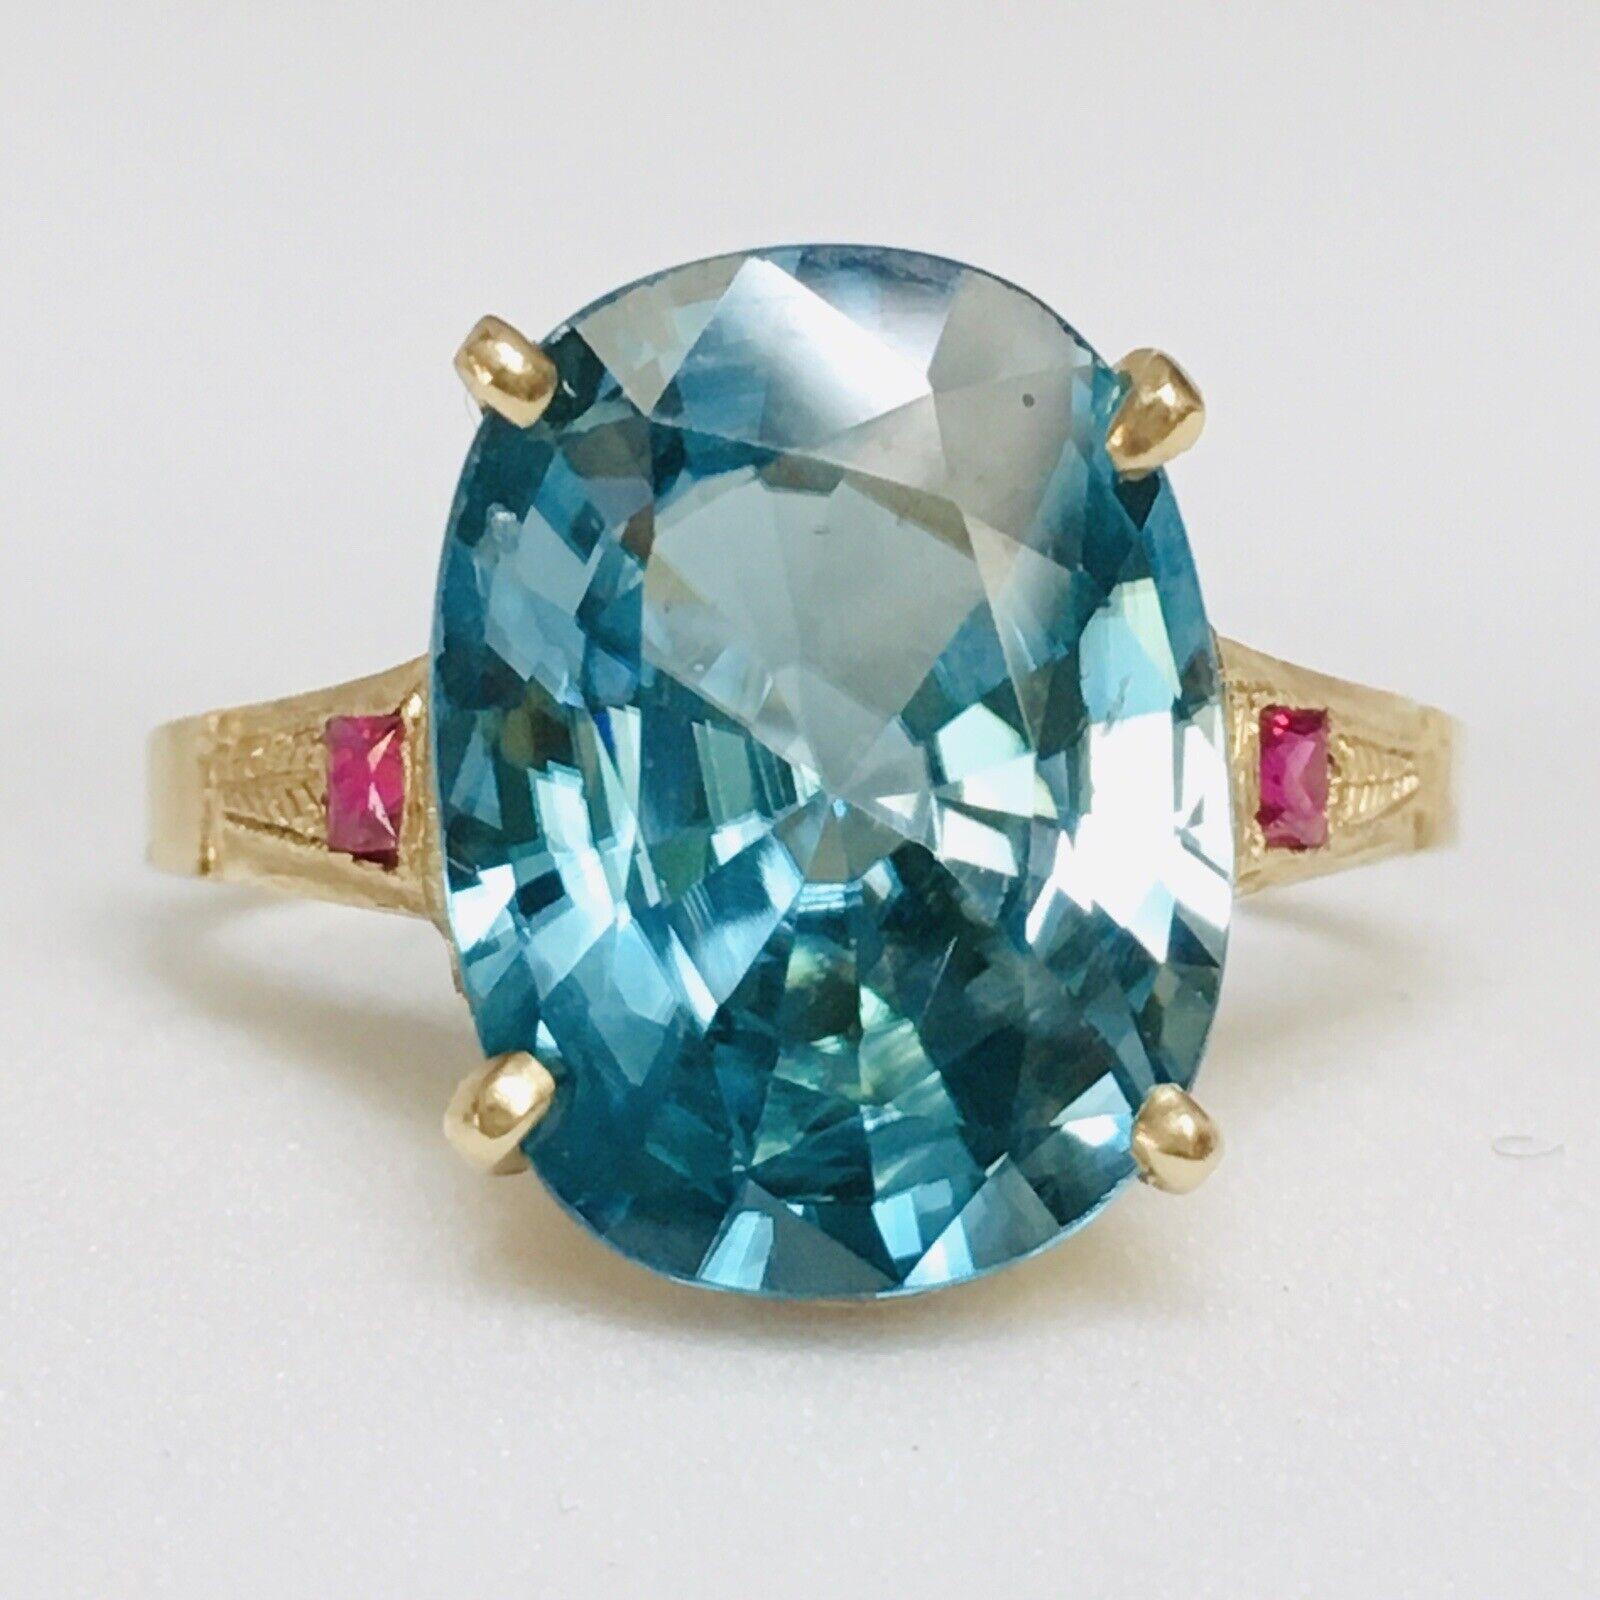 Oval Cut Vintage 14K Yellow Gold 7.5 Carat Oval Faceted Blue Zircon Ruby Ring Size 7